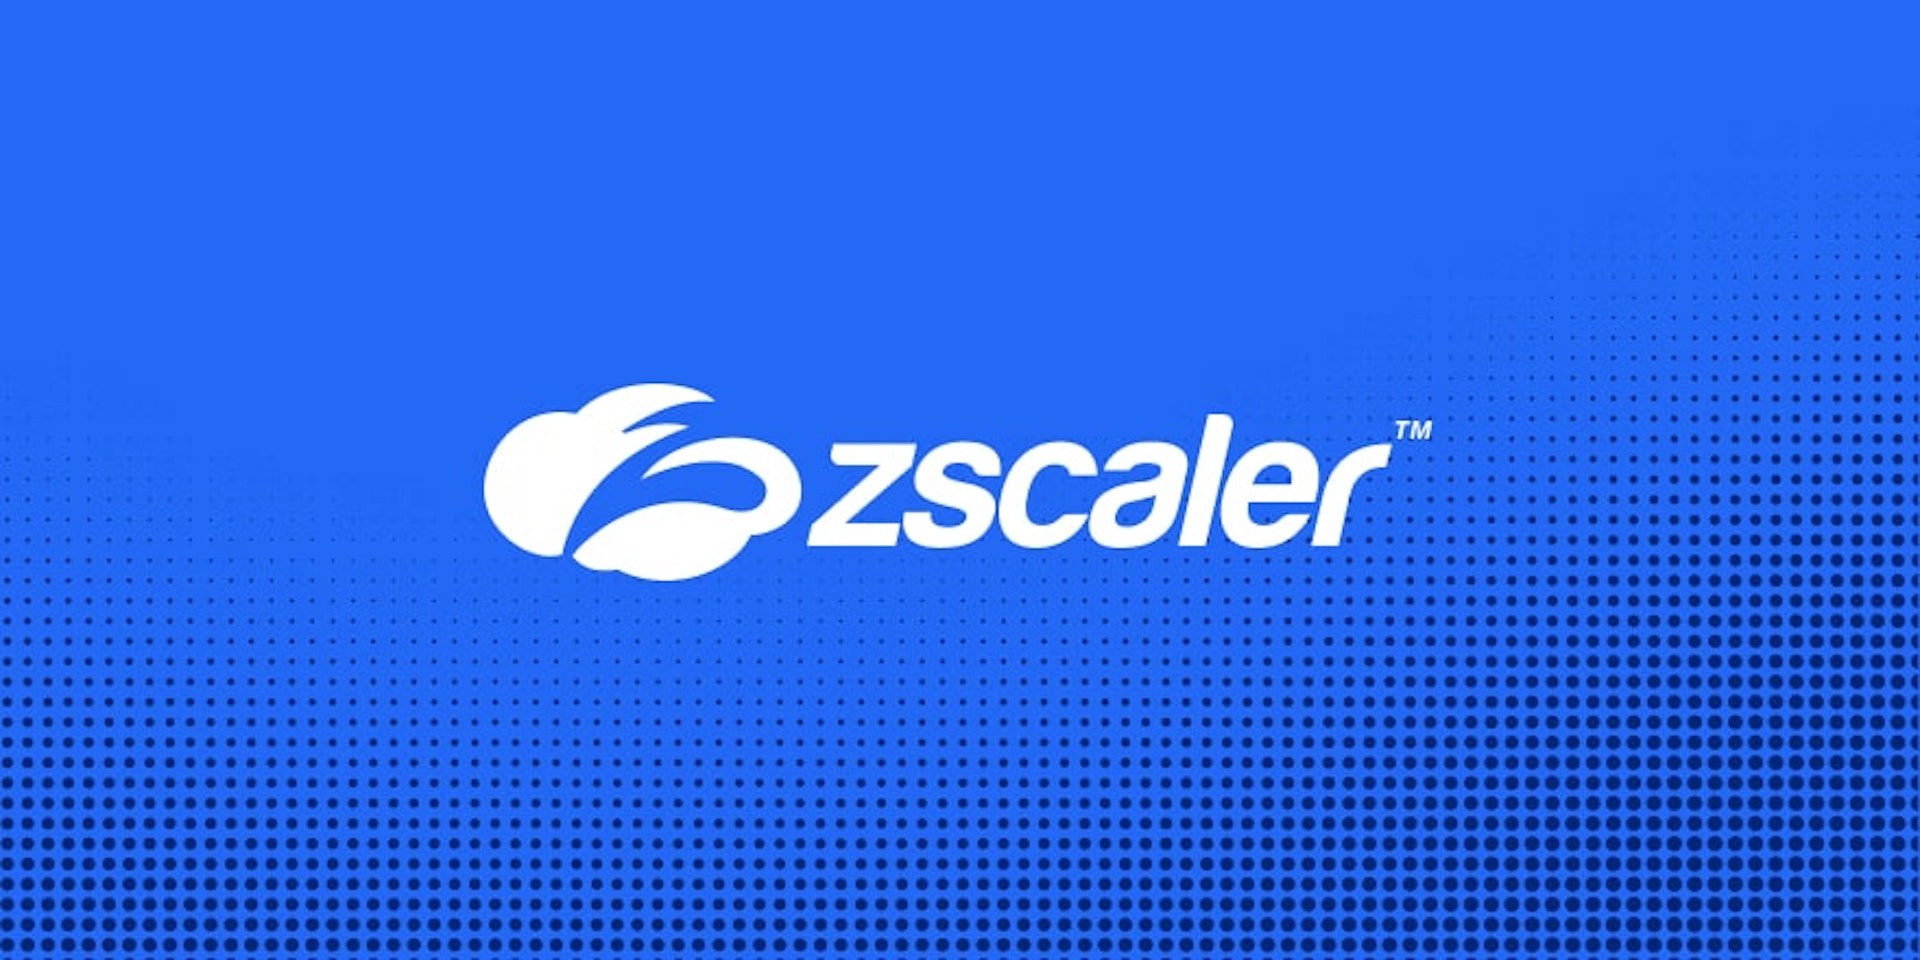 Zscalerのロゴ